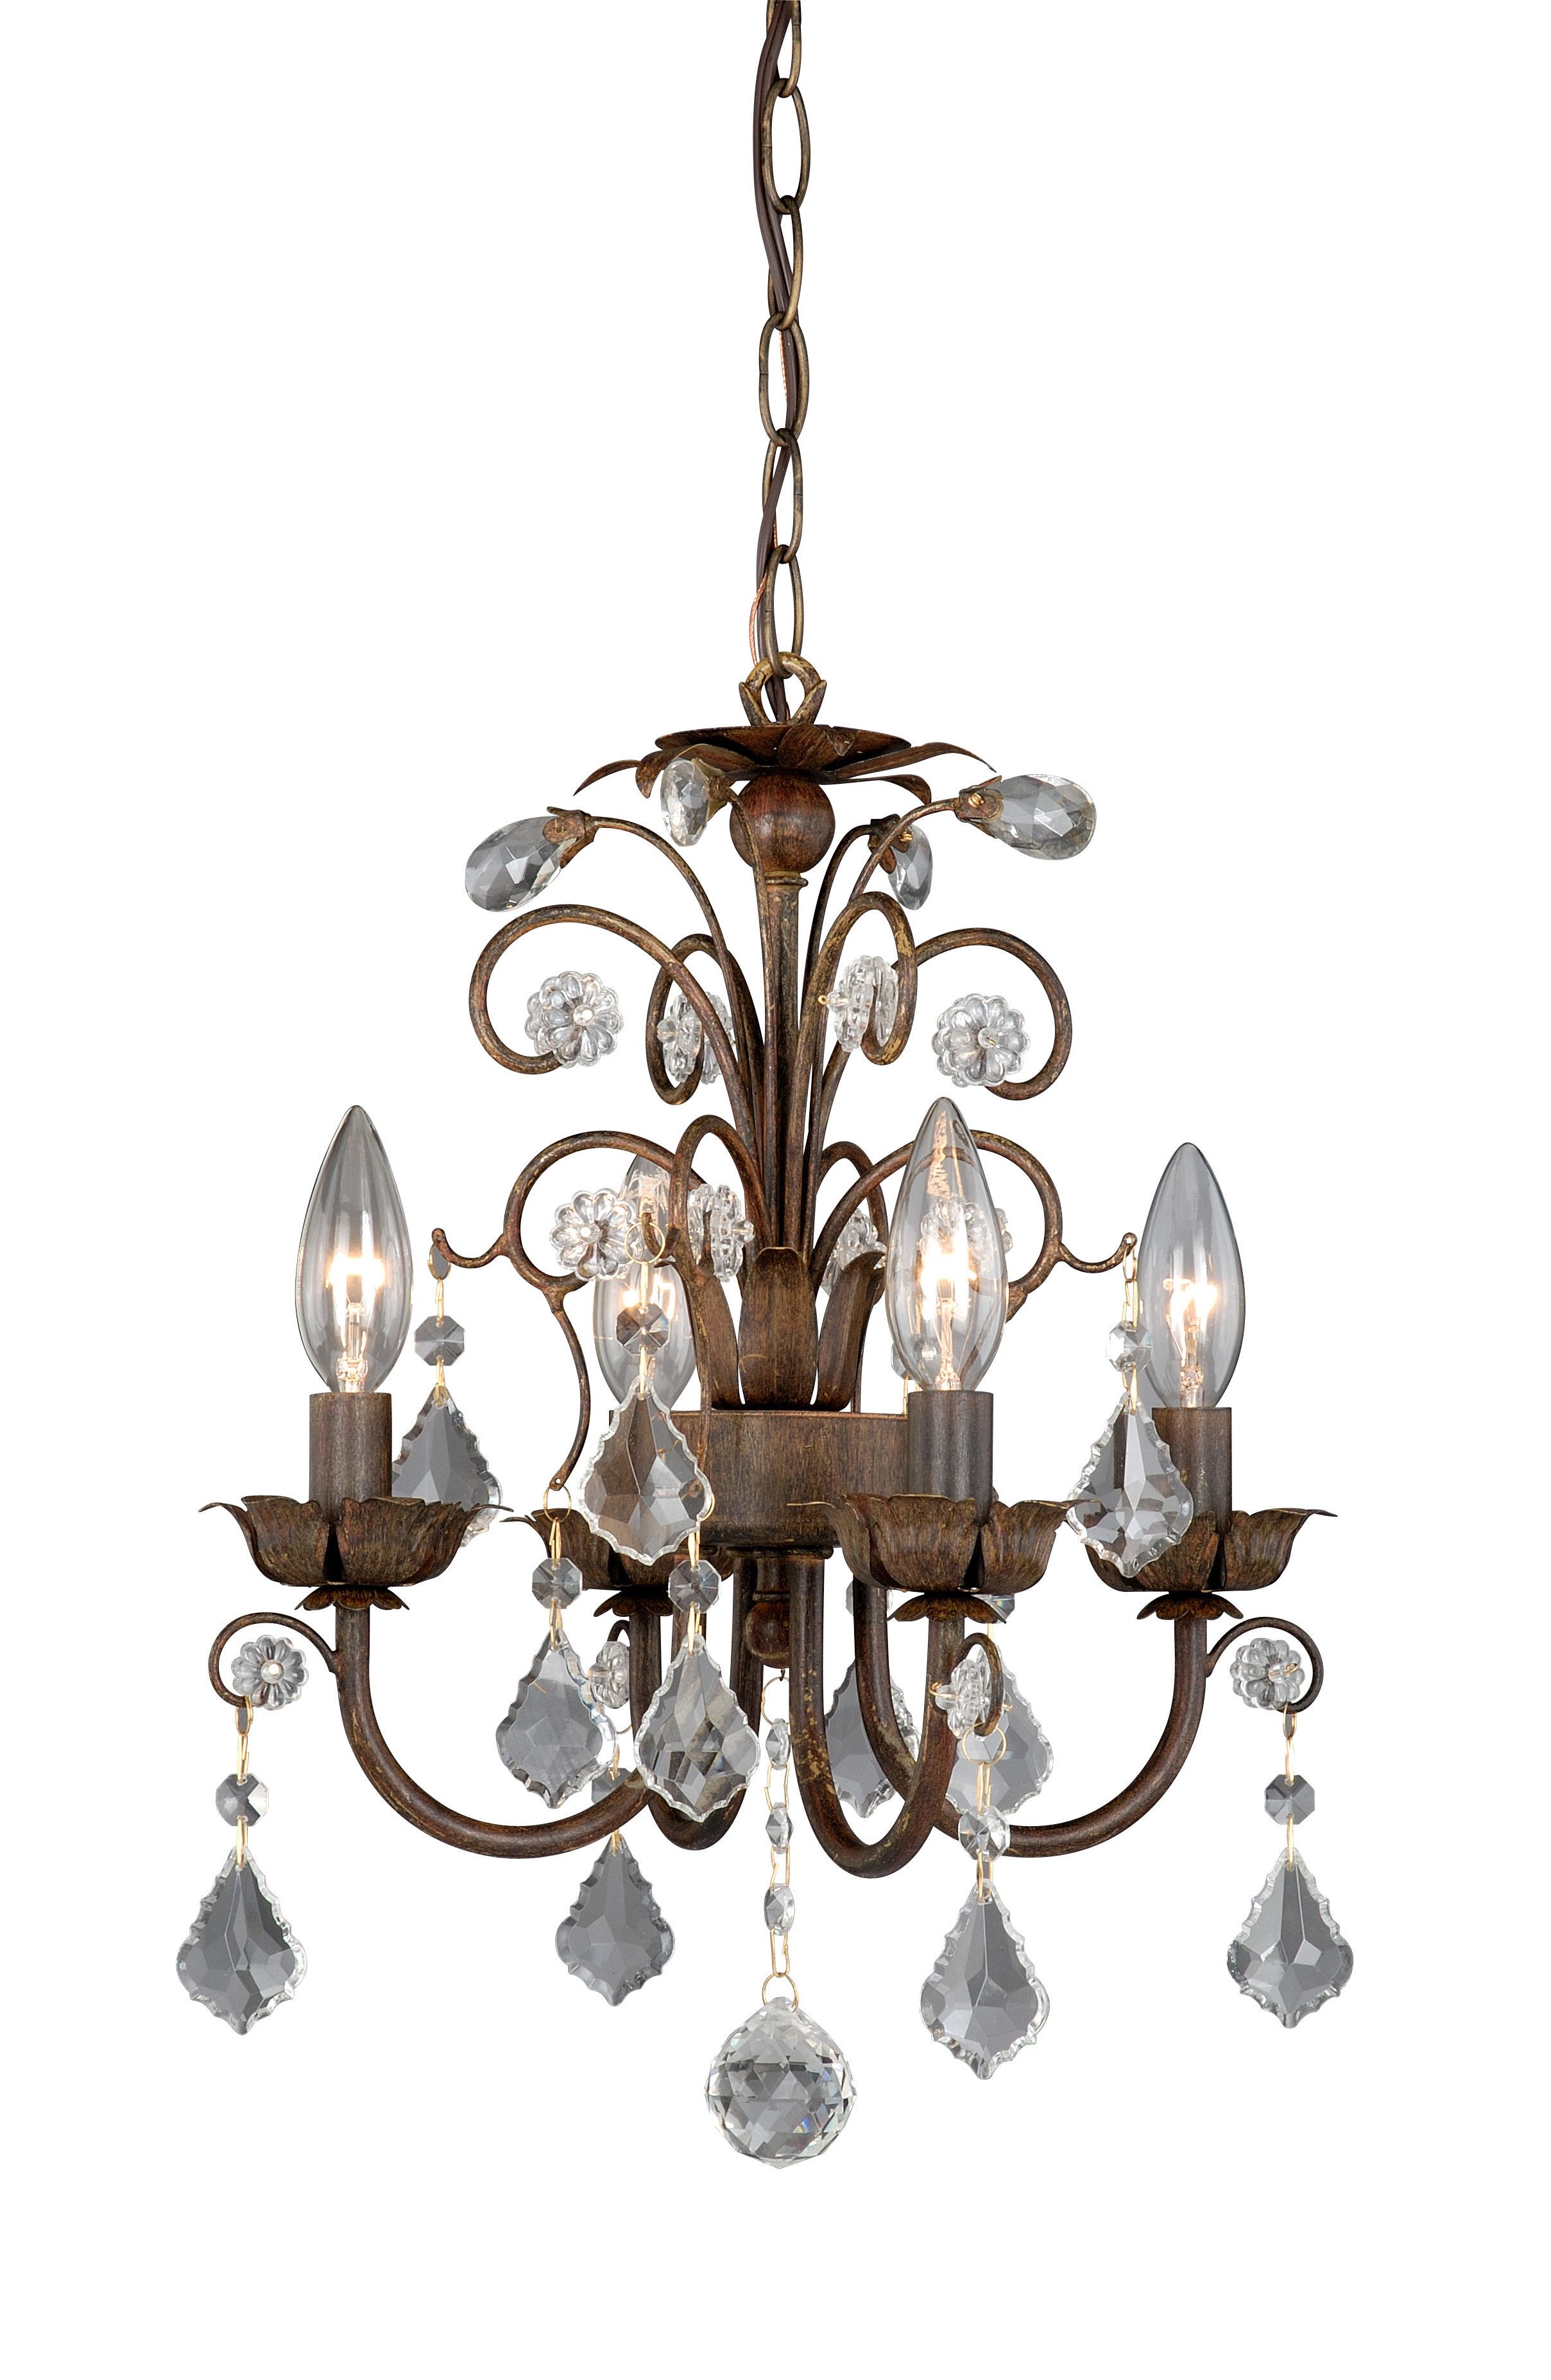 2020 Aldora 4 Light Candle Style Chandeliers With Laux 4 Light Candle Style Chandelier (View 7 of 20)